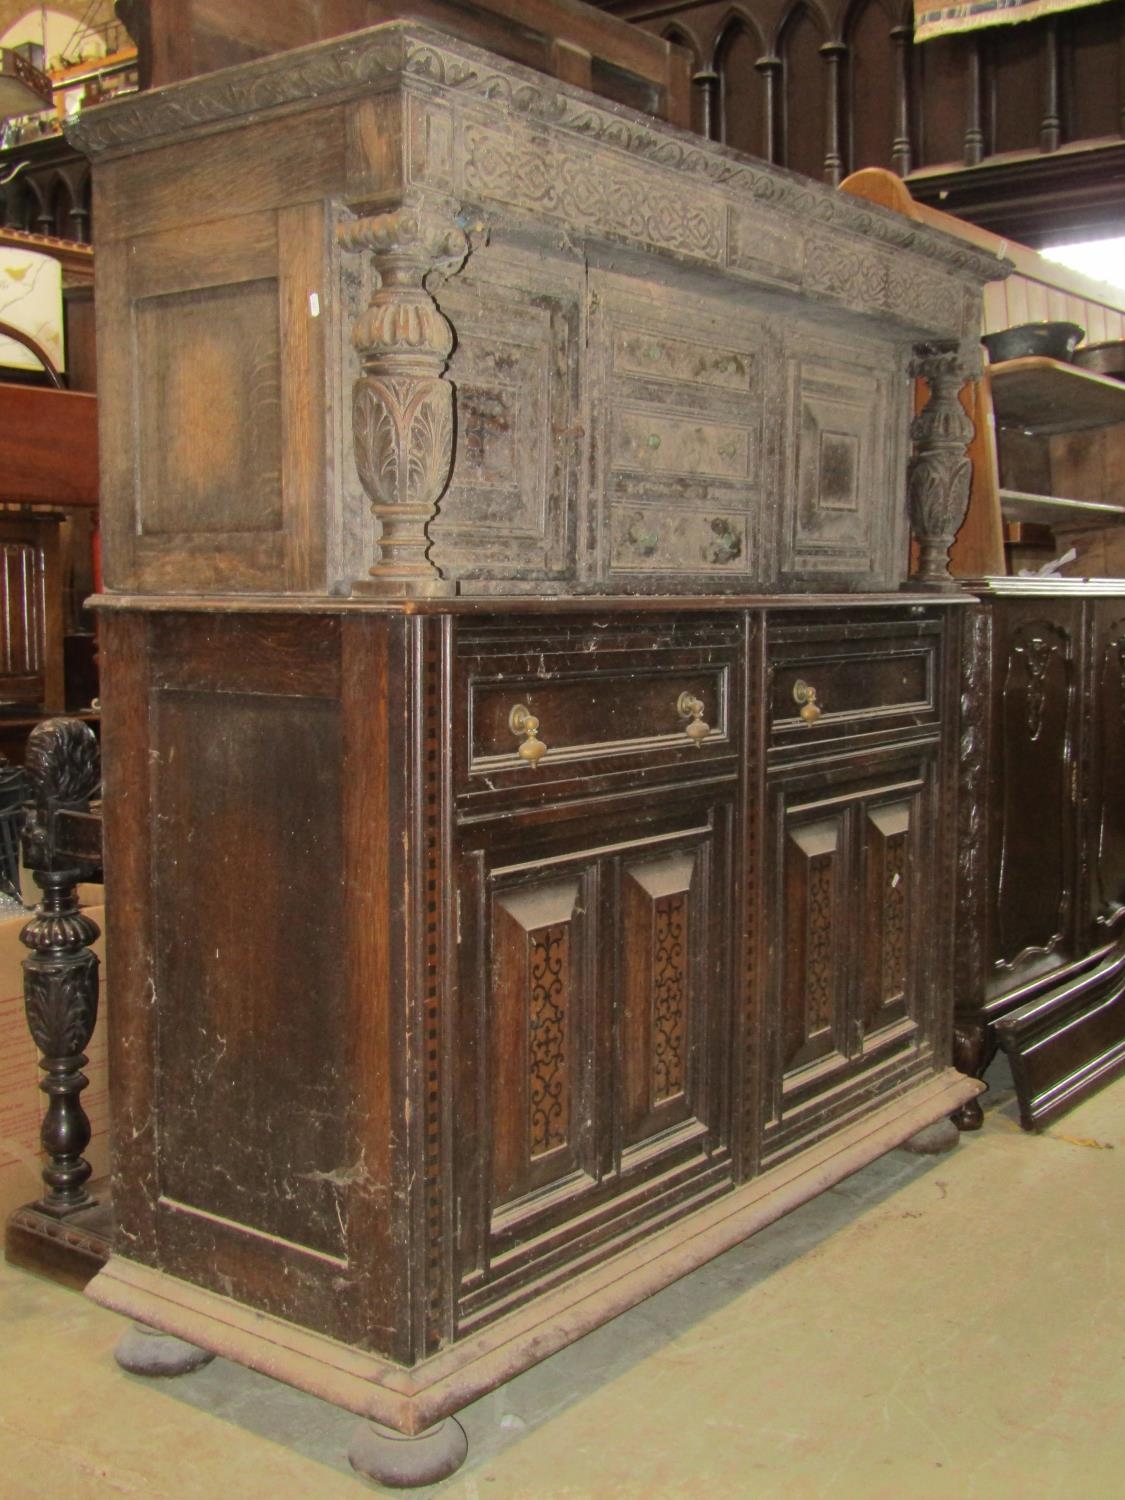 An antique old English style oak court cupboard enclosed by an arrangement of cupboards and